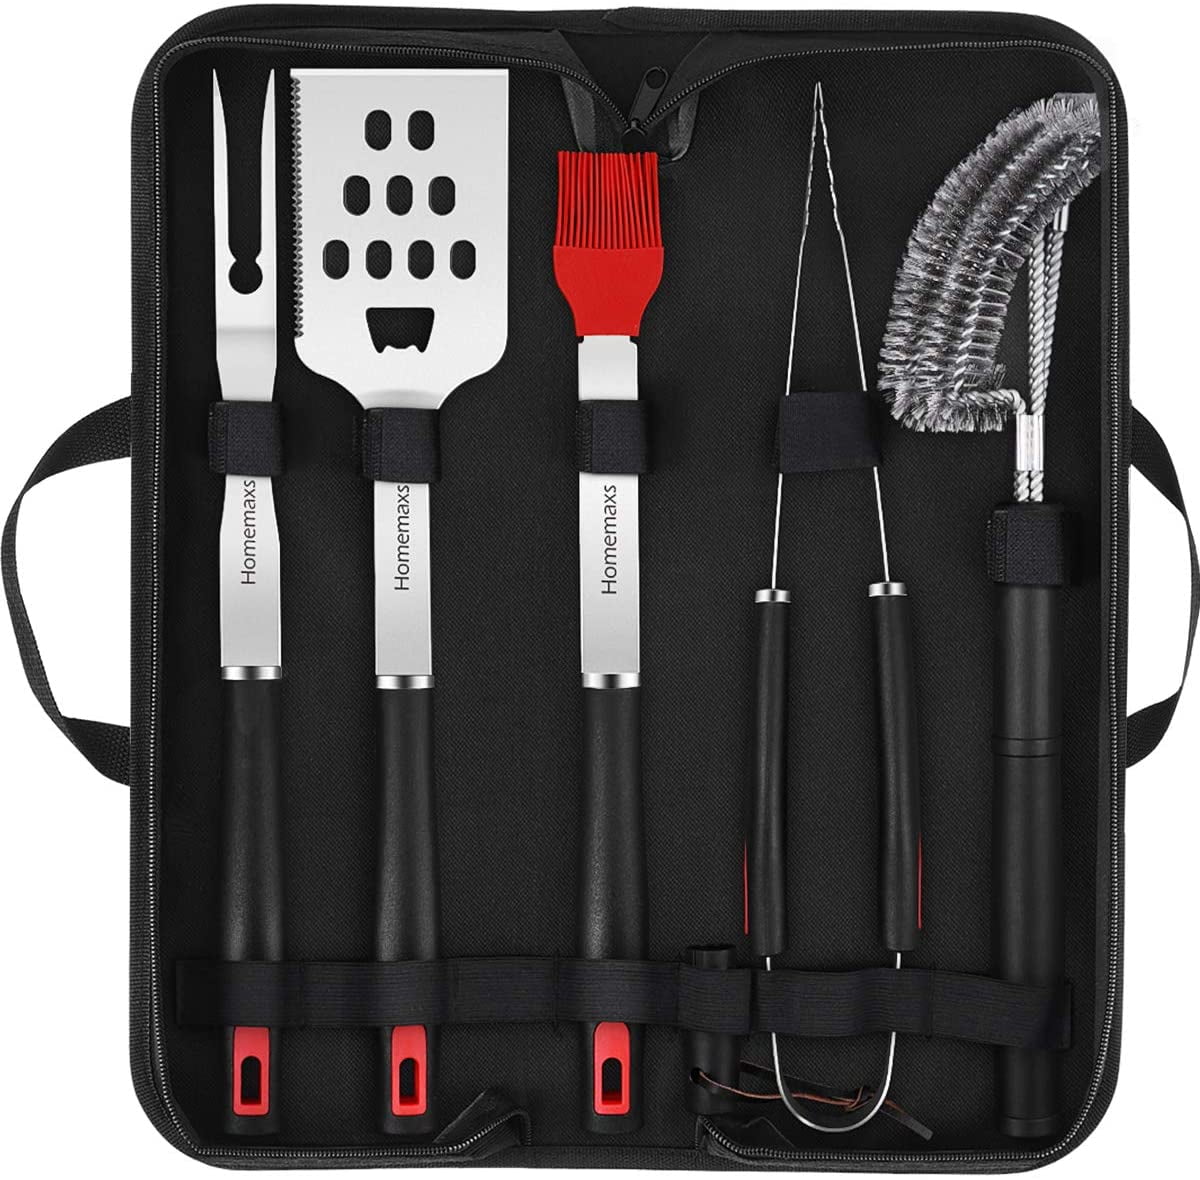 BBQ Tools Barbecue Grill Tool Set Kit 6Pcs Stainless Steel With Aluminum Case 